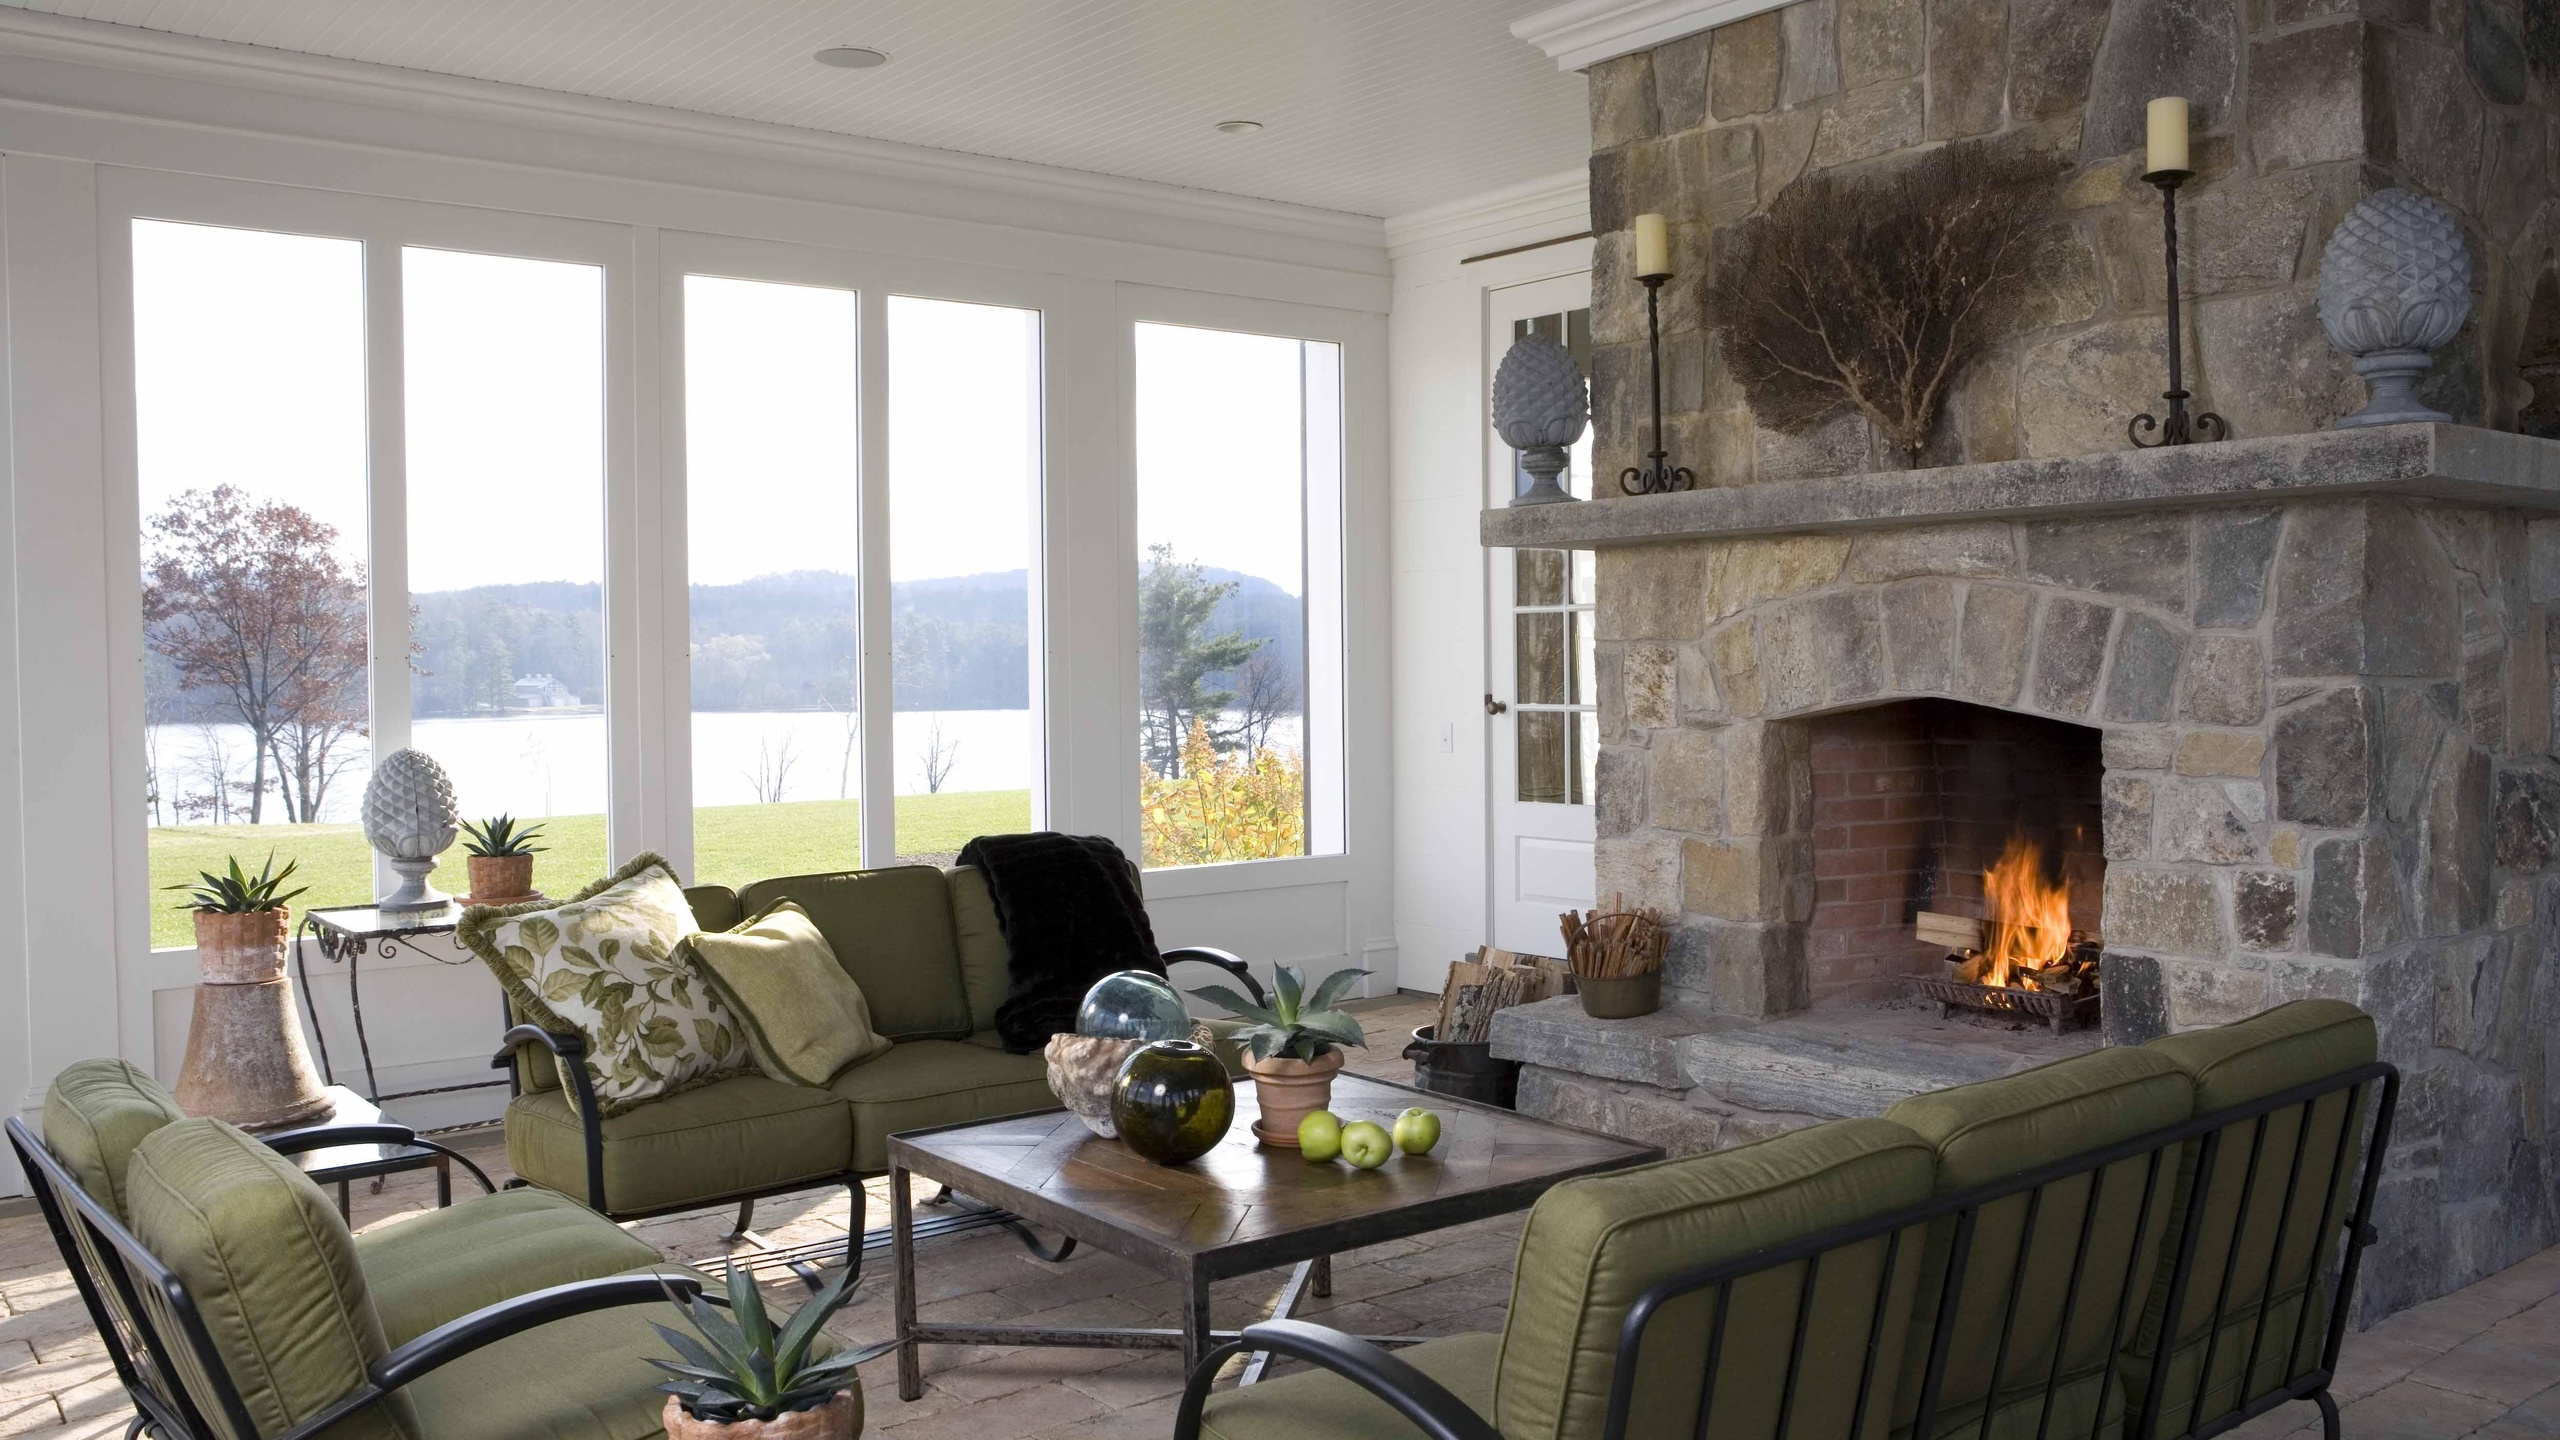 Spacious living room interior with stained-glass windows and fireplace.